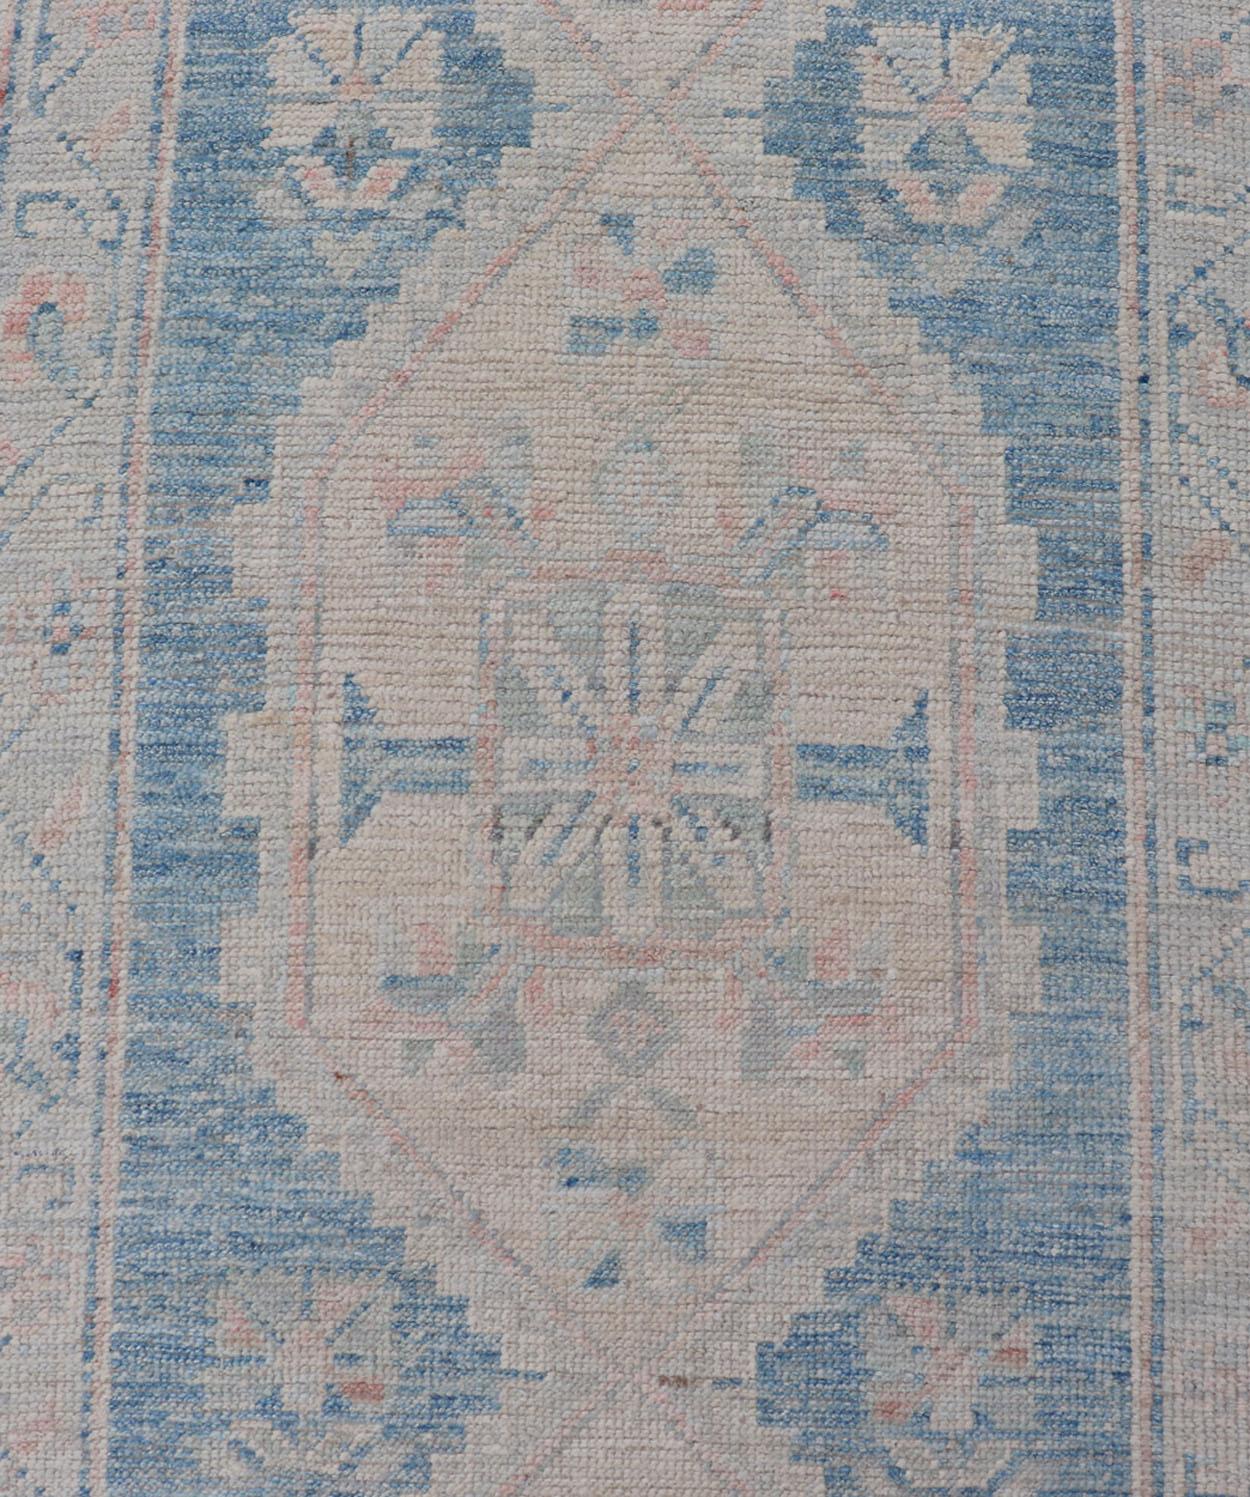 Contemporary Oushak Modern Runner with Medallion Design In Shades of Blue and Cream For Sale